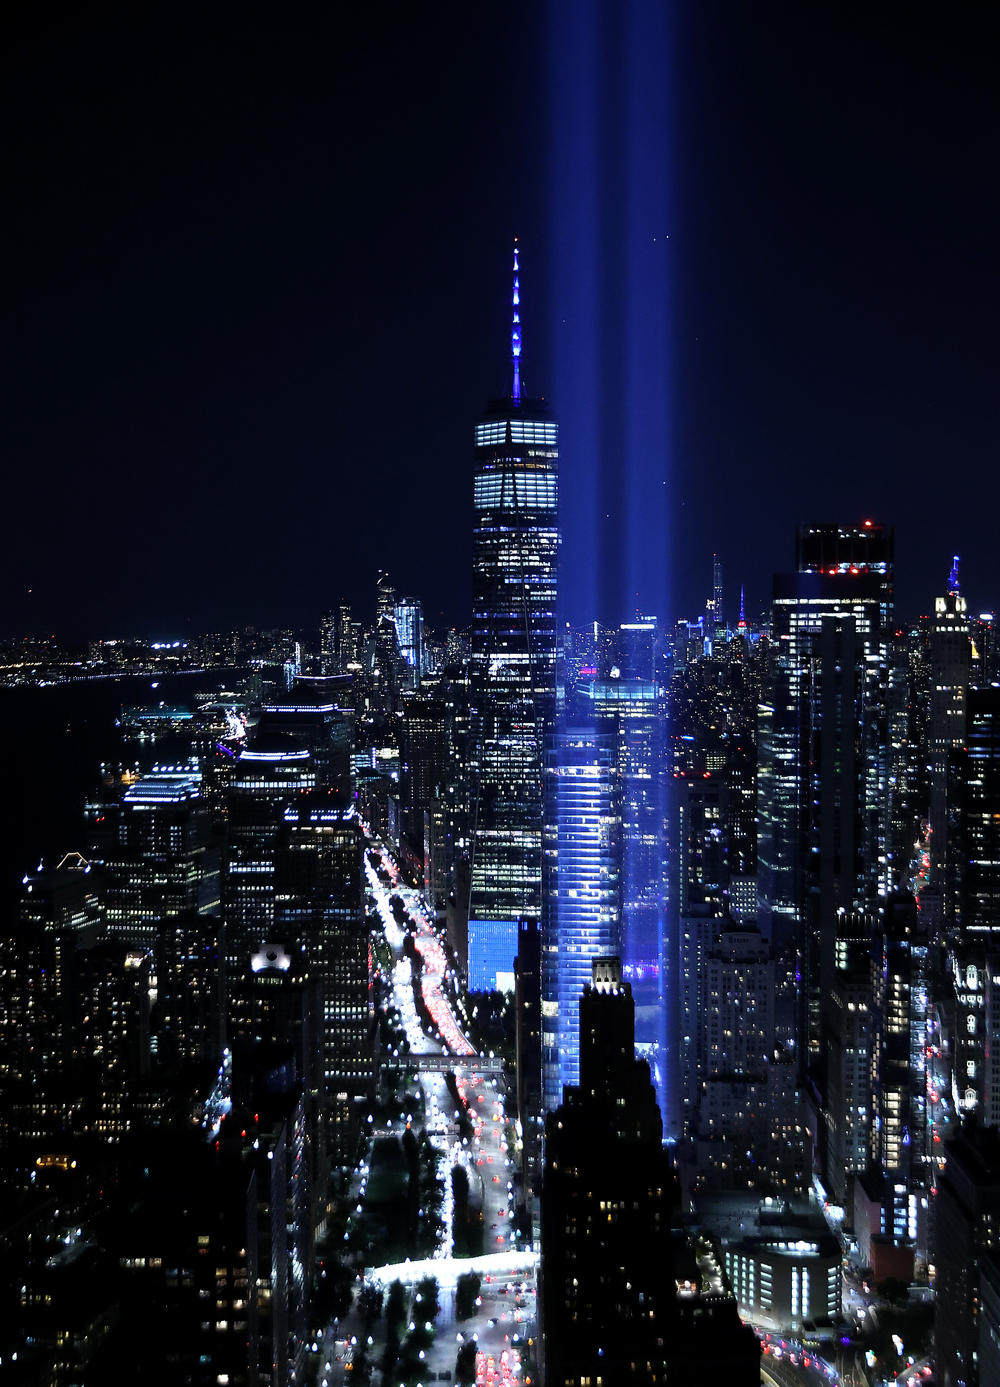 The light sculpture commemorating the attacks of Sept. 11 has been shown to disrupt bird migration.